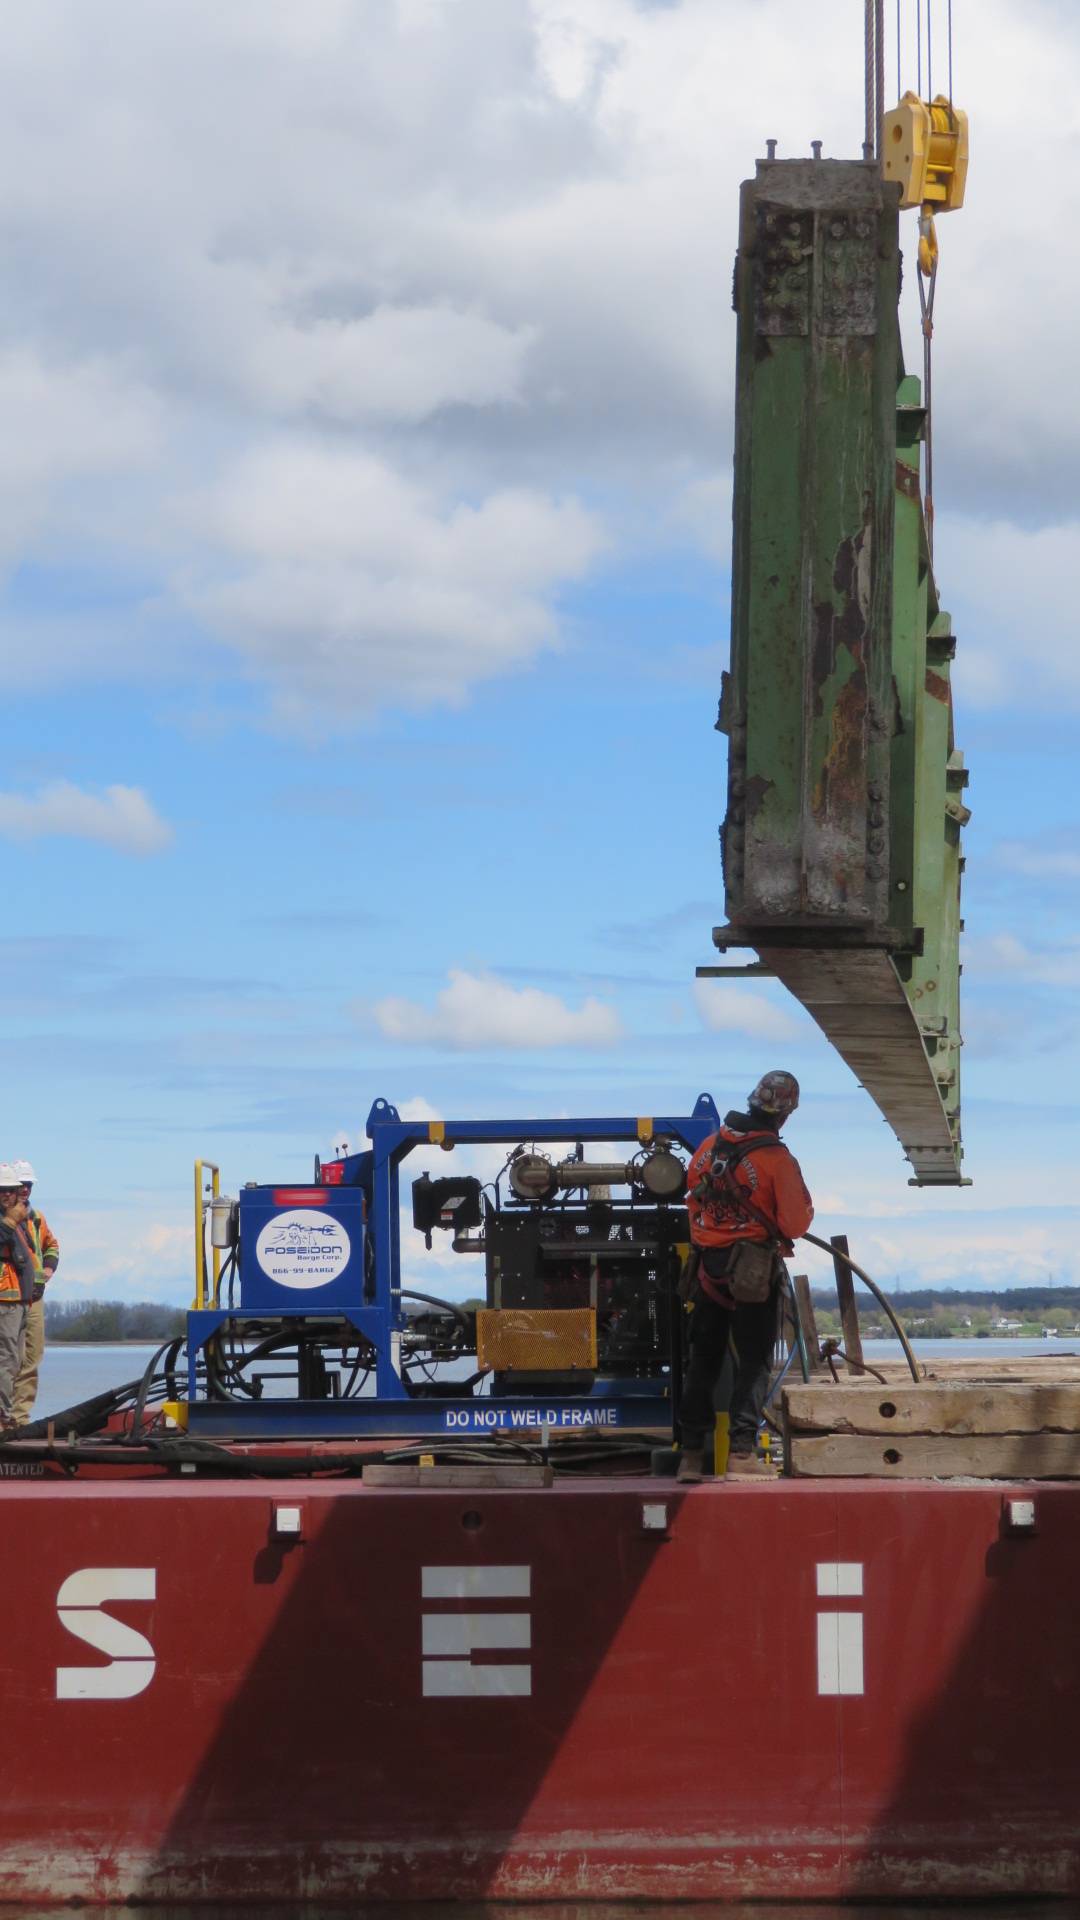 Lowering the girder onto the barge